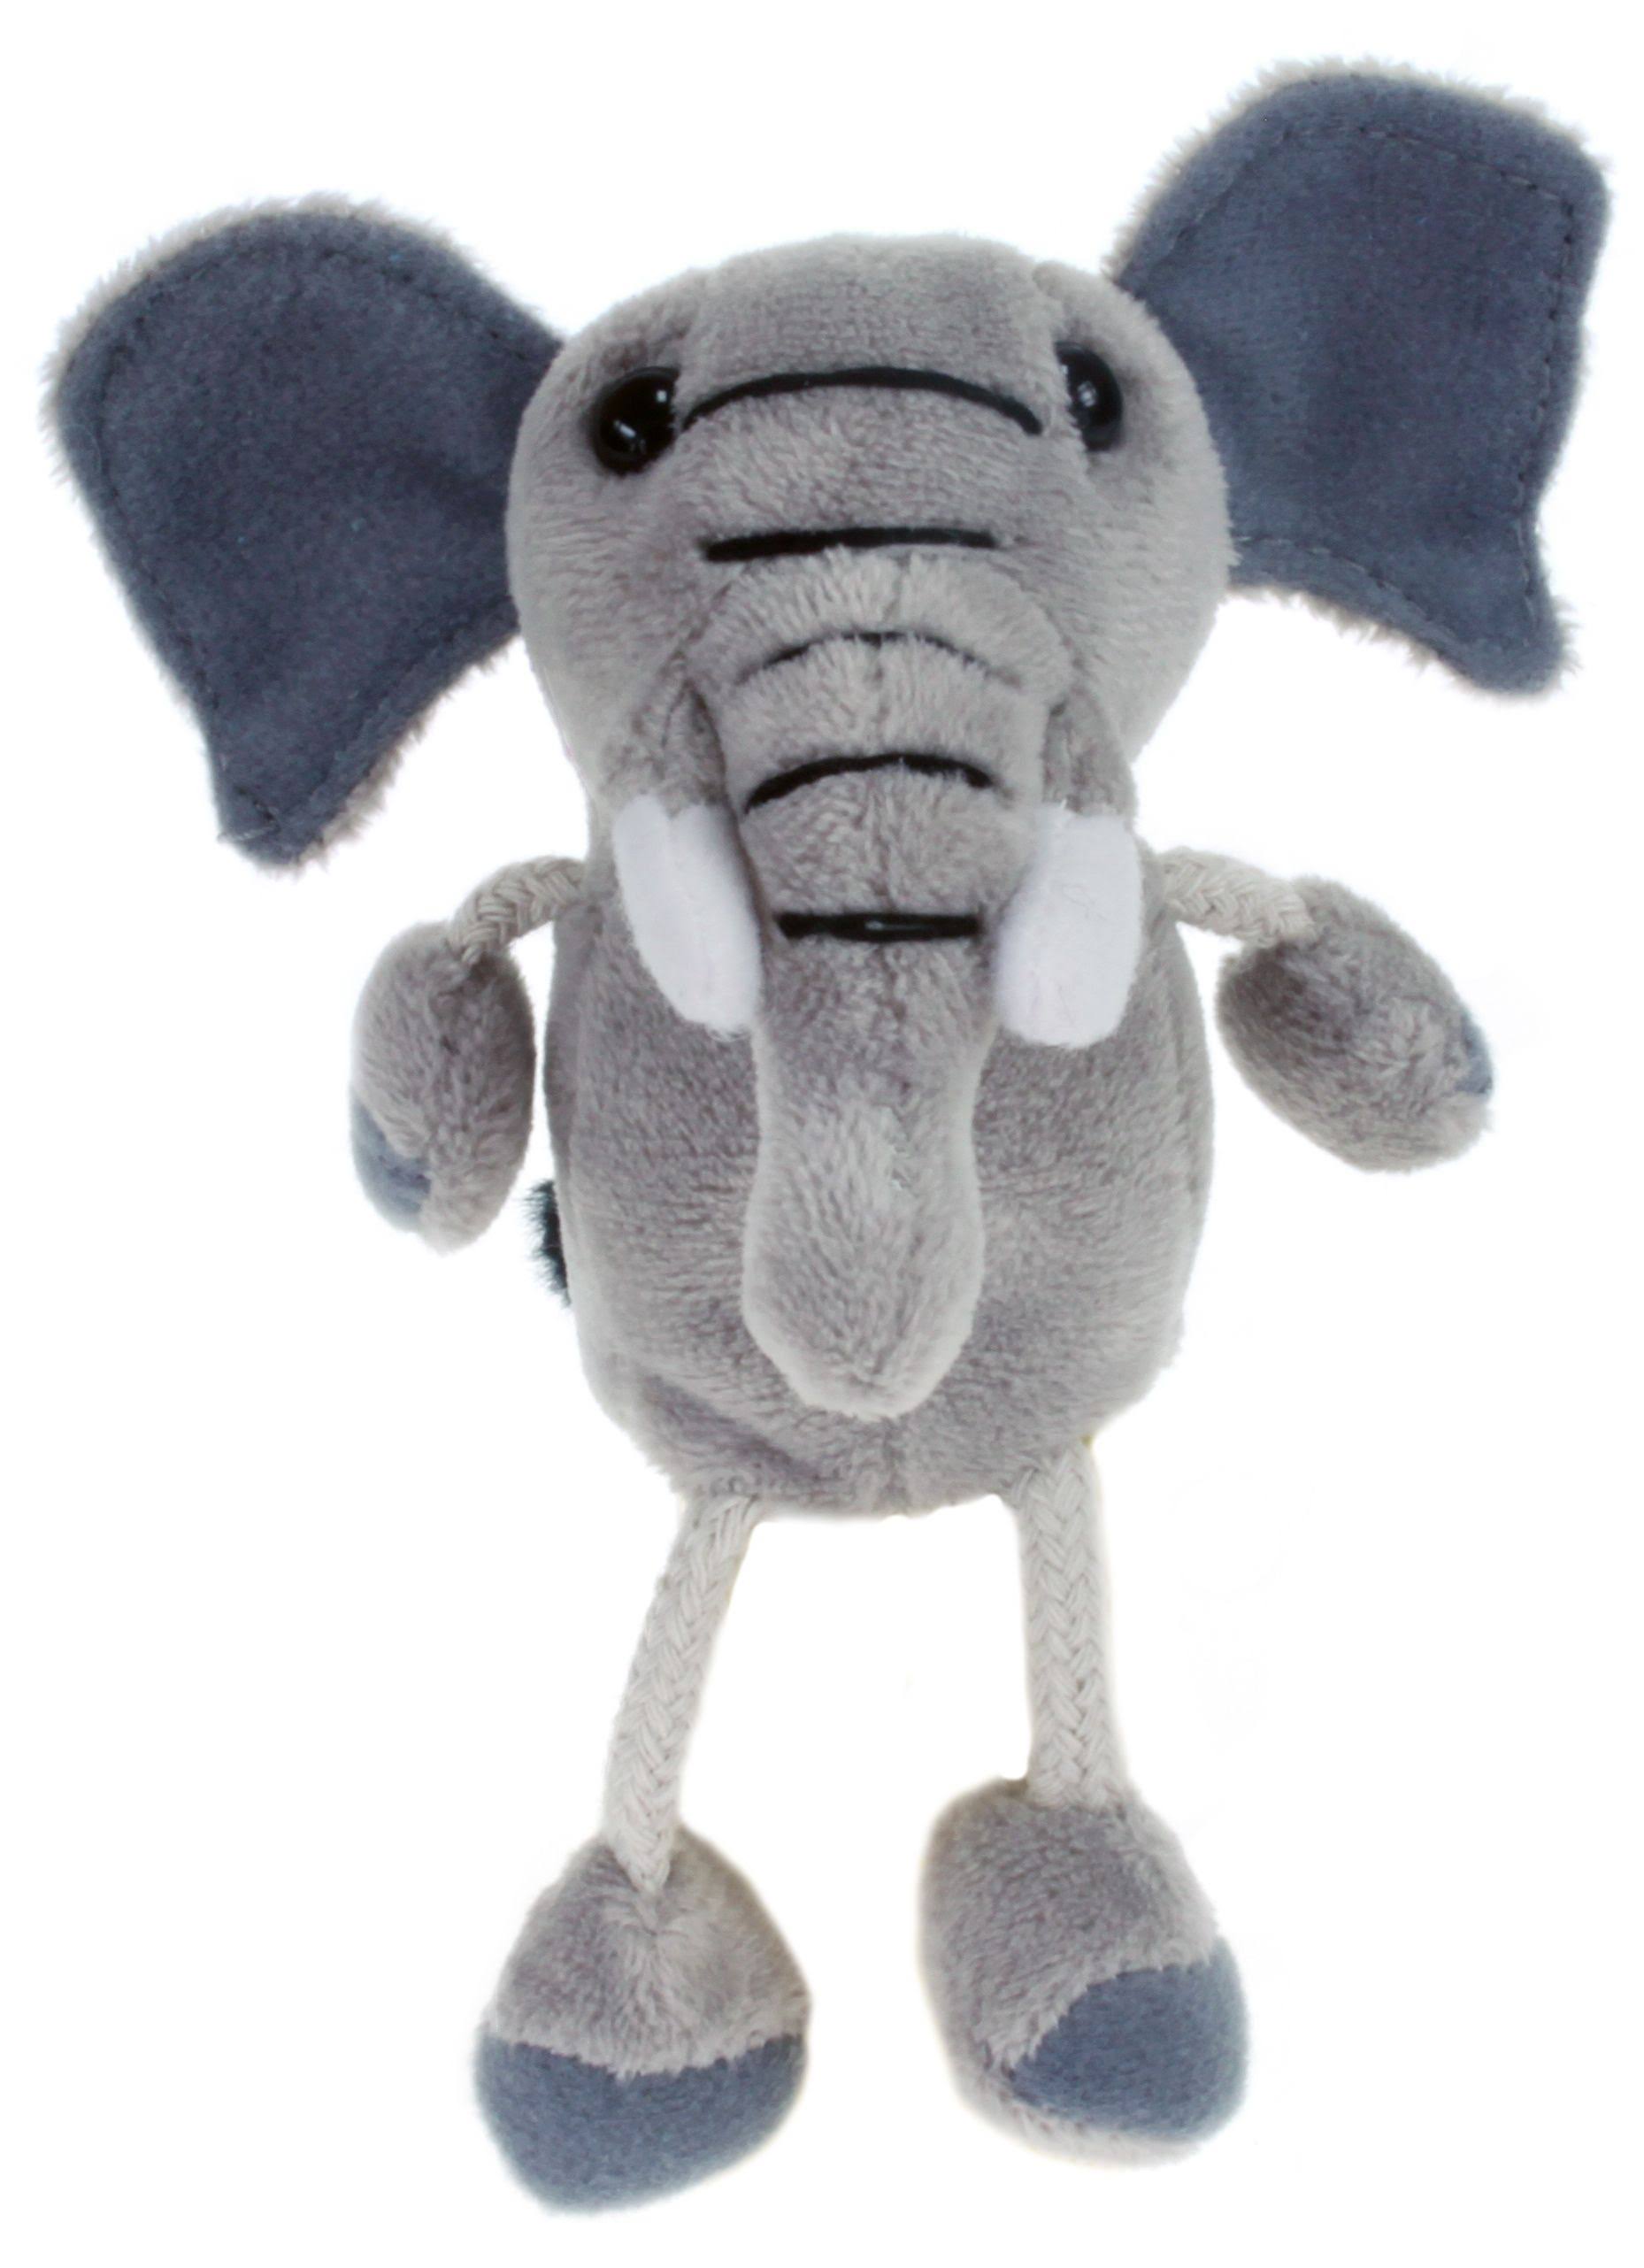 The Puppet Company Finger Puppet - Elephant